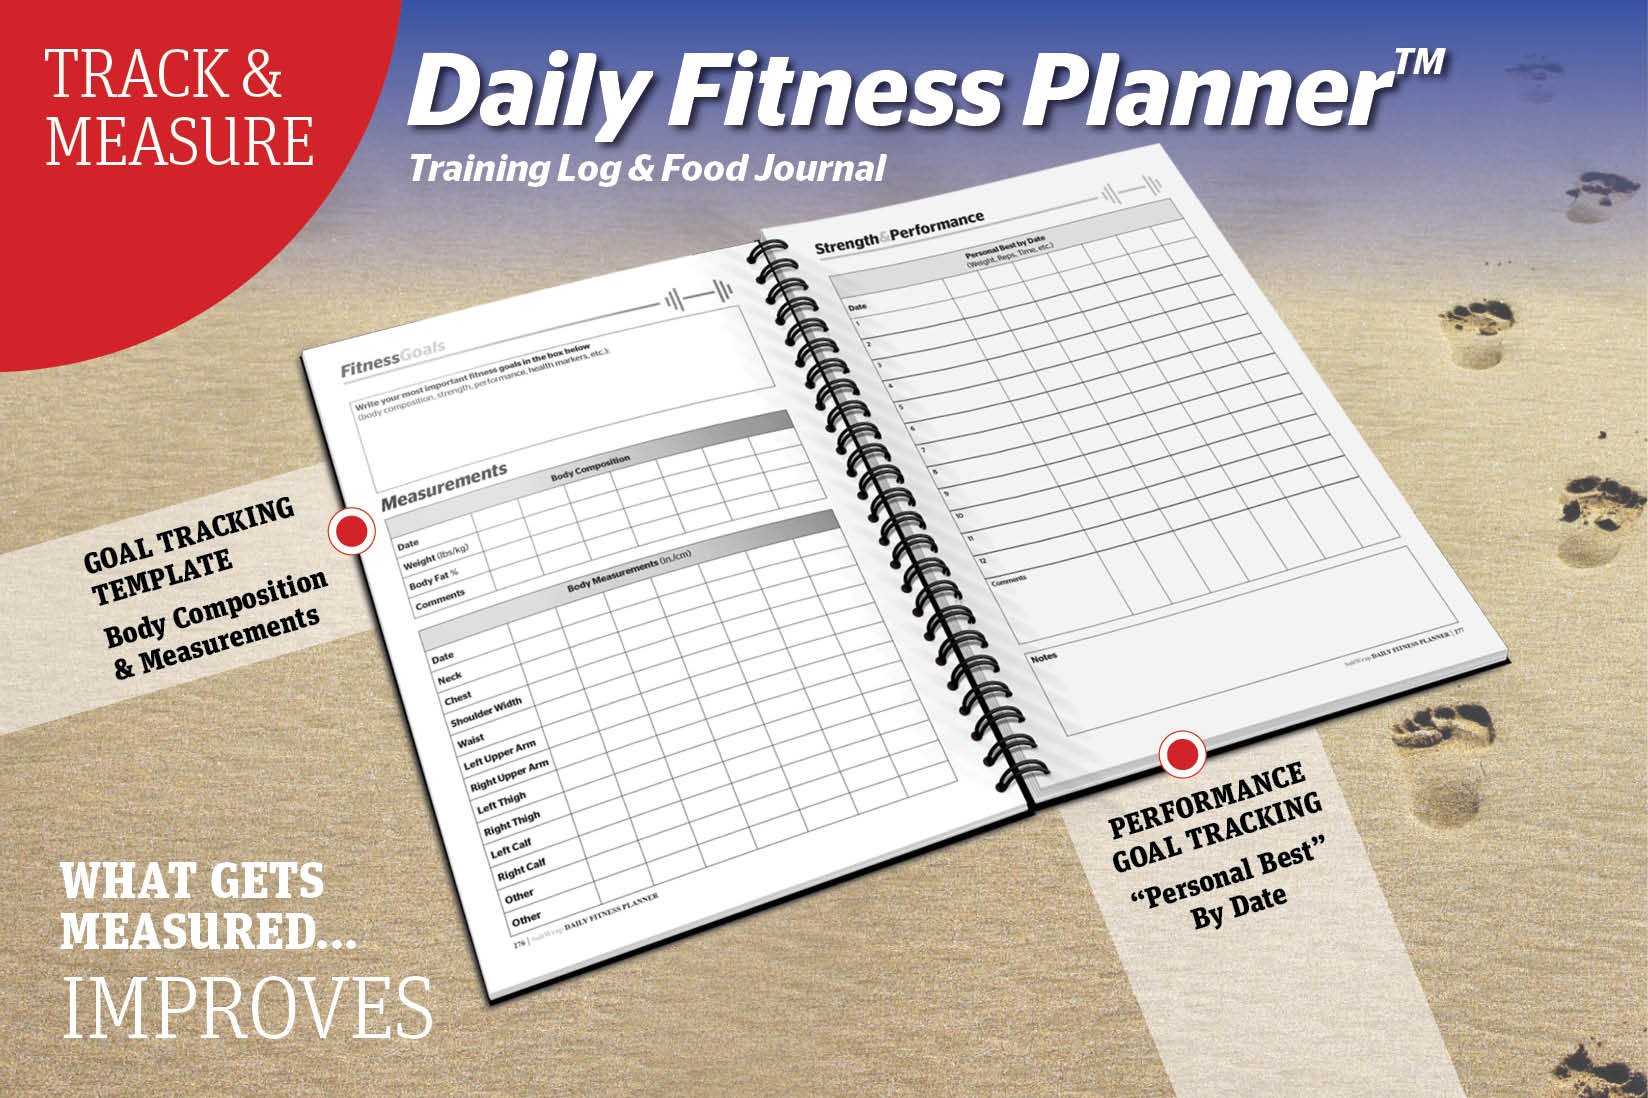 SaltWrap Daily Fitness Planner - Gym Workout Training Log, Weightlifting Exercise Journal, and Food/Diet Tracker - Daily and Weekly Pages, Goal Tracking, Spiral-Bound, 7 x 10 inches